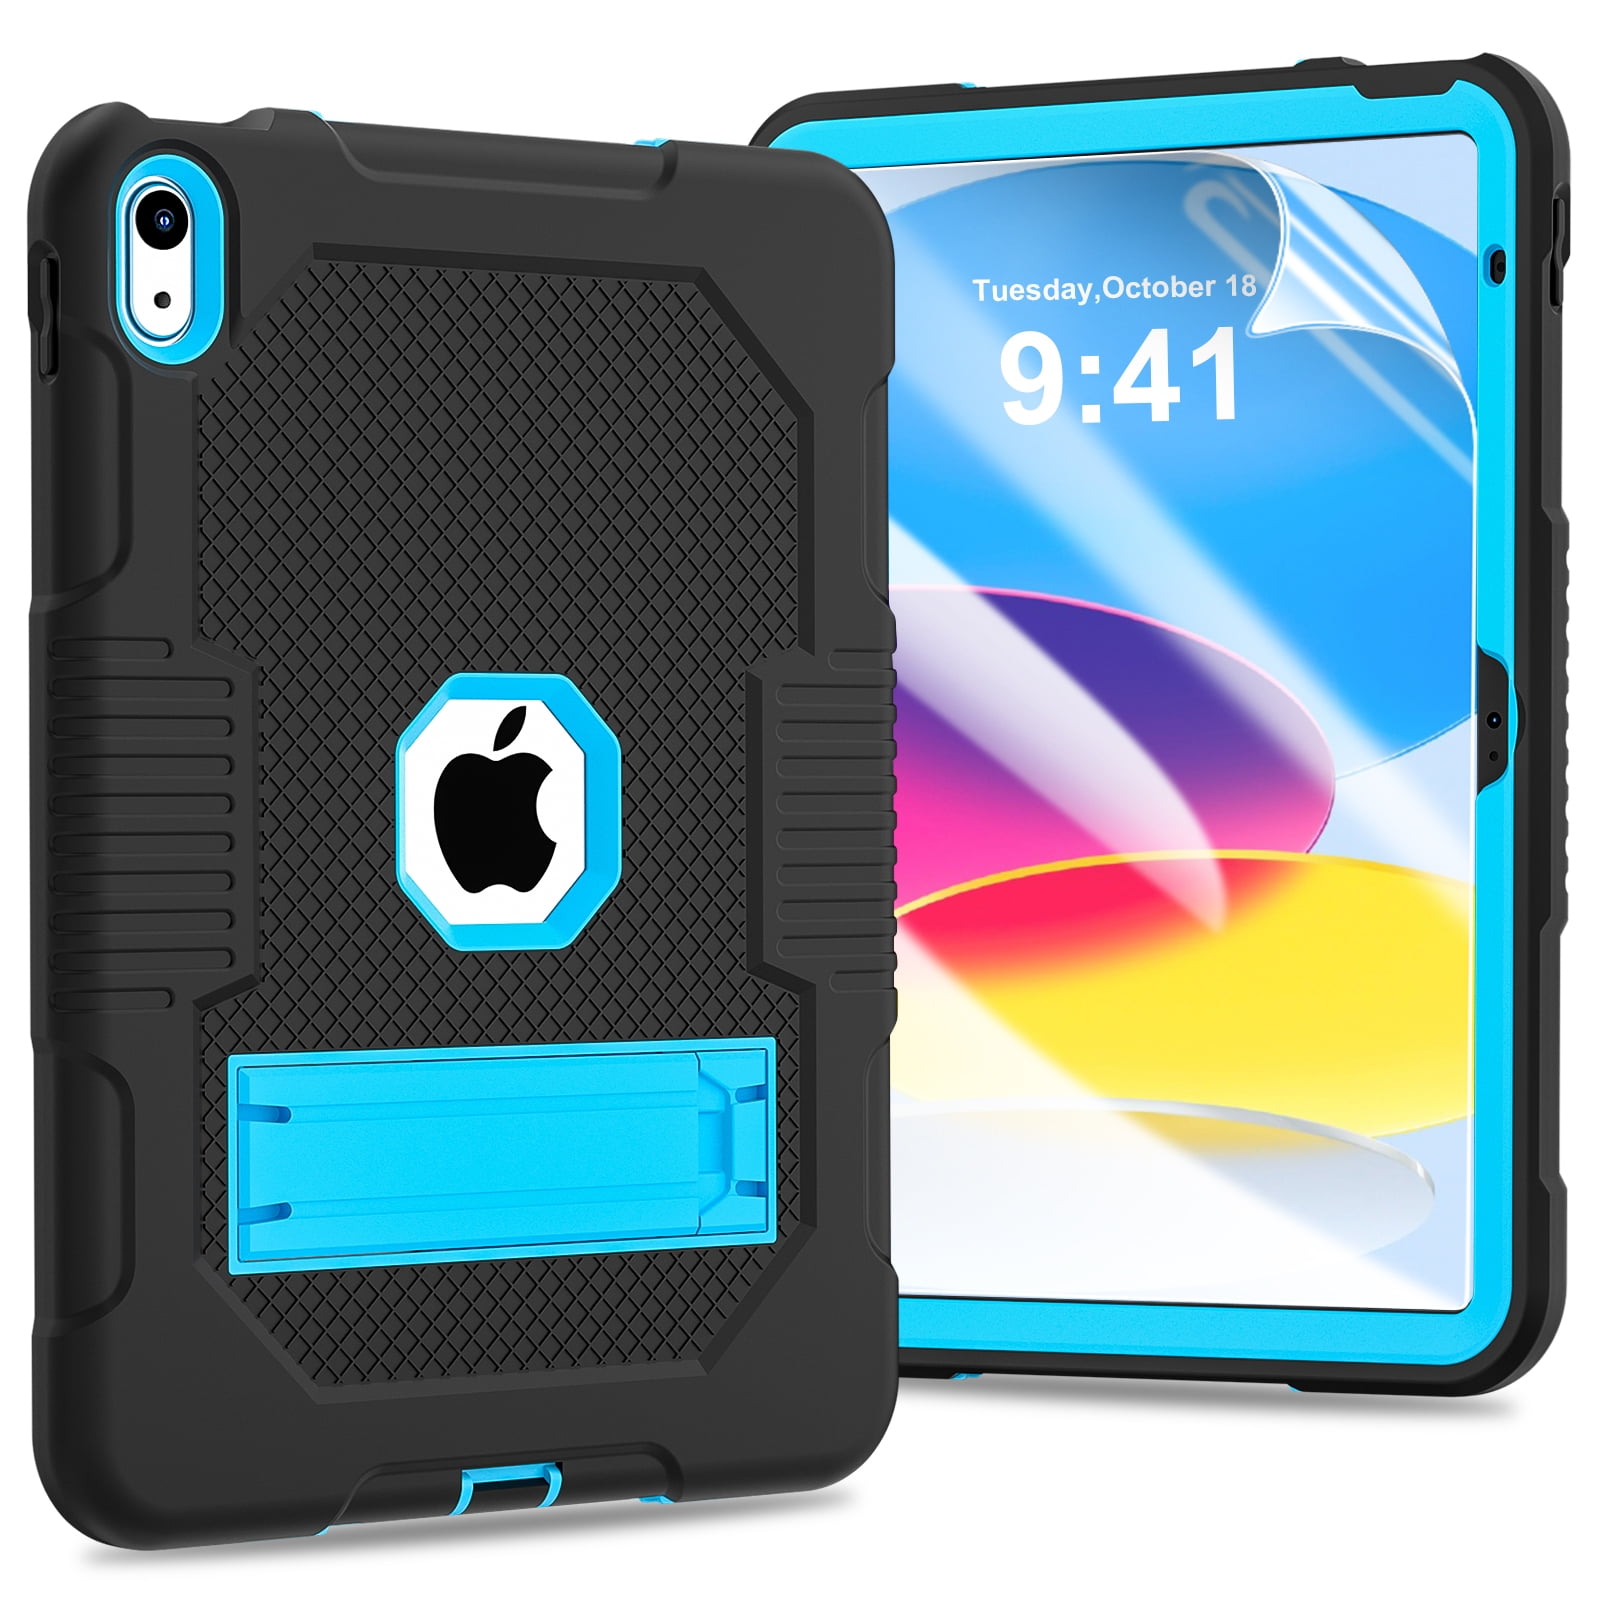 Dteck for iPad 10th Generation Case with HD Screen Protector Film